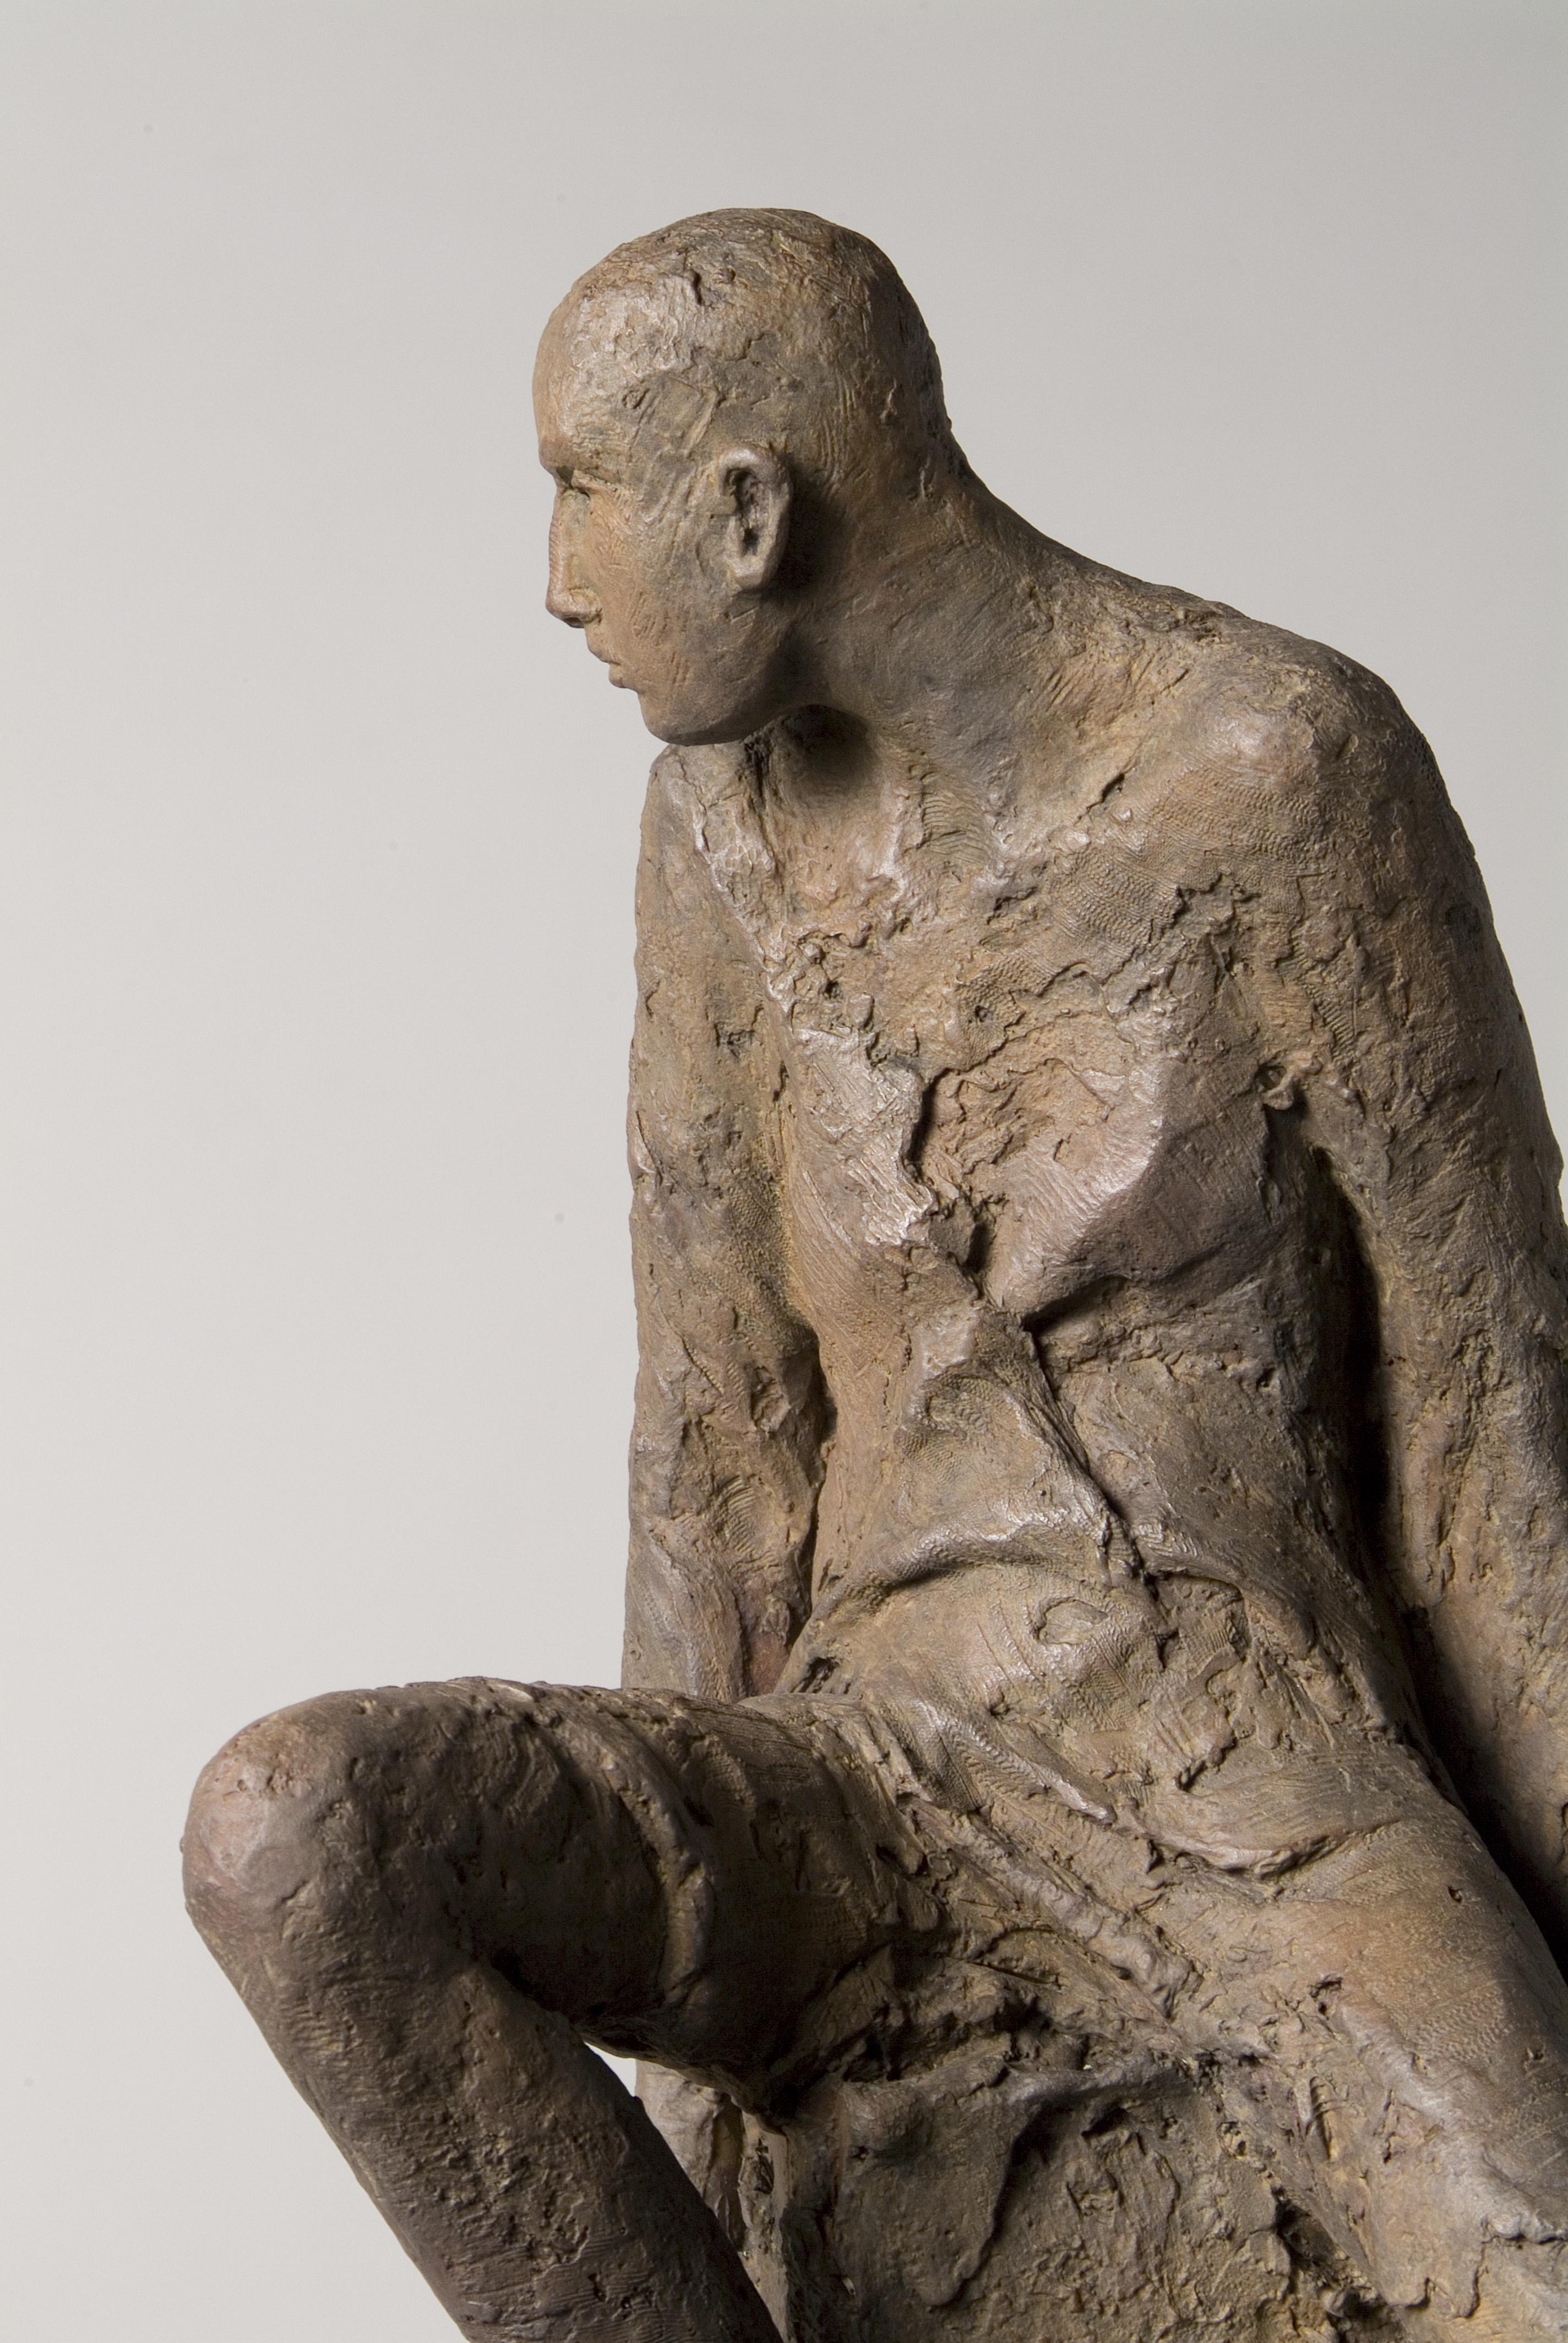 Bronze #68 by Hanneke Beaumont

Beaumont's sculptures are realized in terracotta, bronze and cast iron, and she is known for sculpting figural life-sized human forms. Her gender neutral subjects are impressively passé in posture, and are meant to